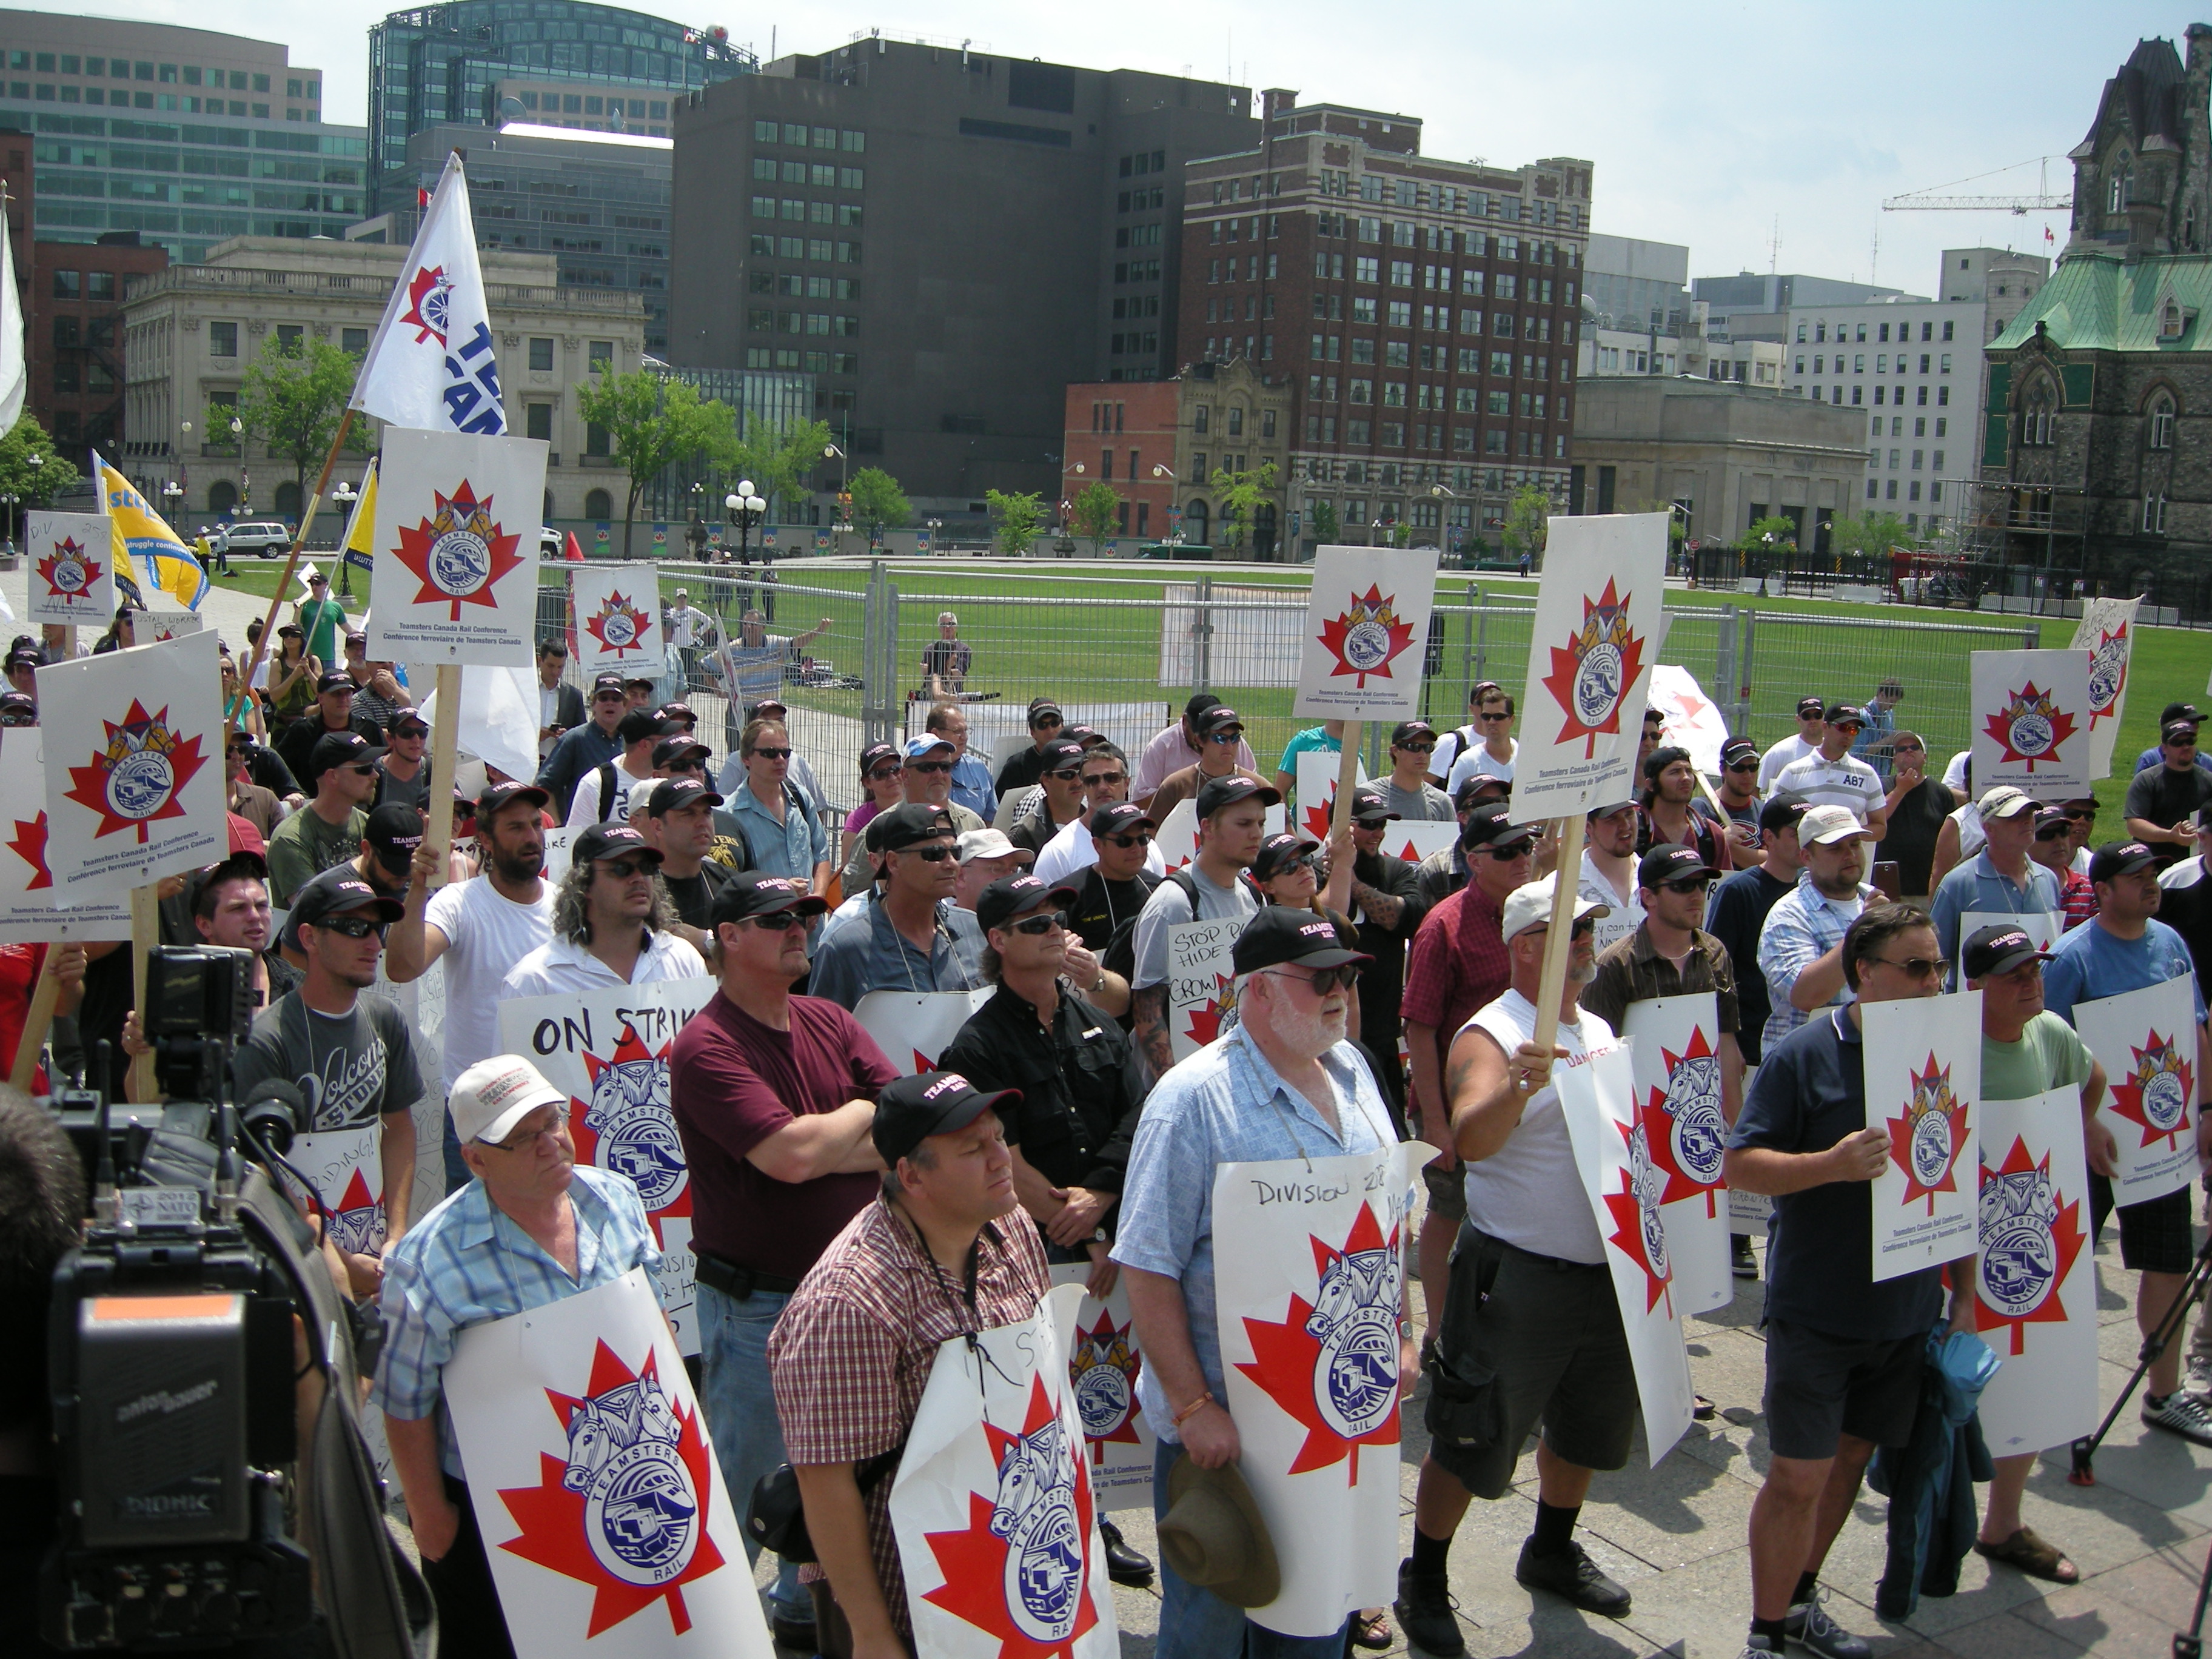 Teamsters rally on Parliament Hill today against the CP back-to-work legislation. (Photo: Karl Nerenberg / rabble.ca)